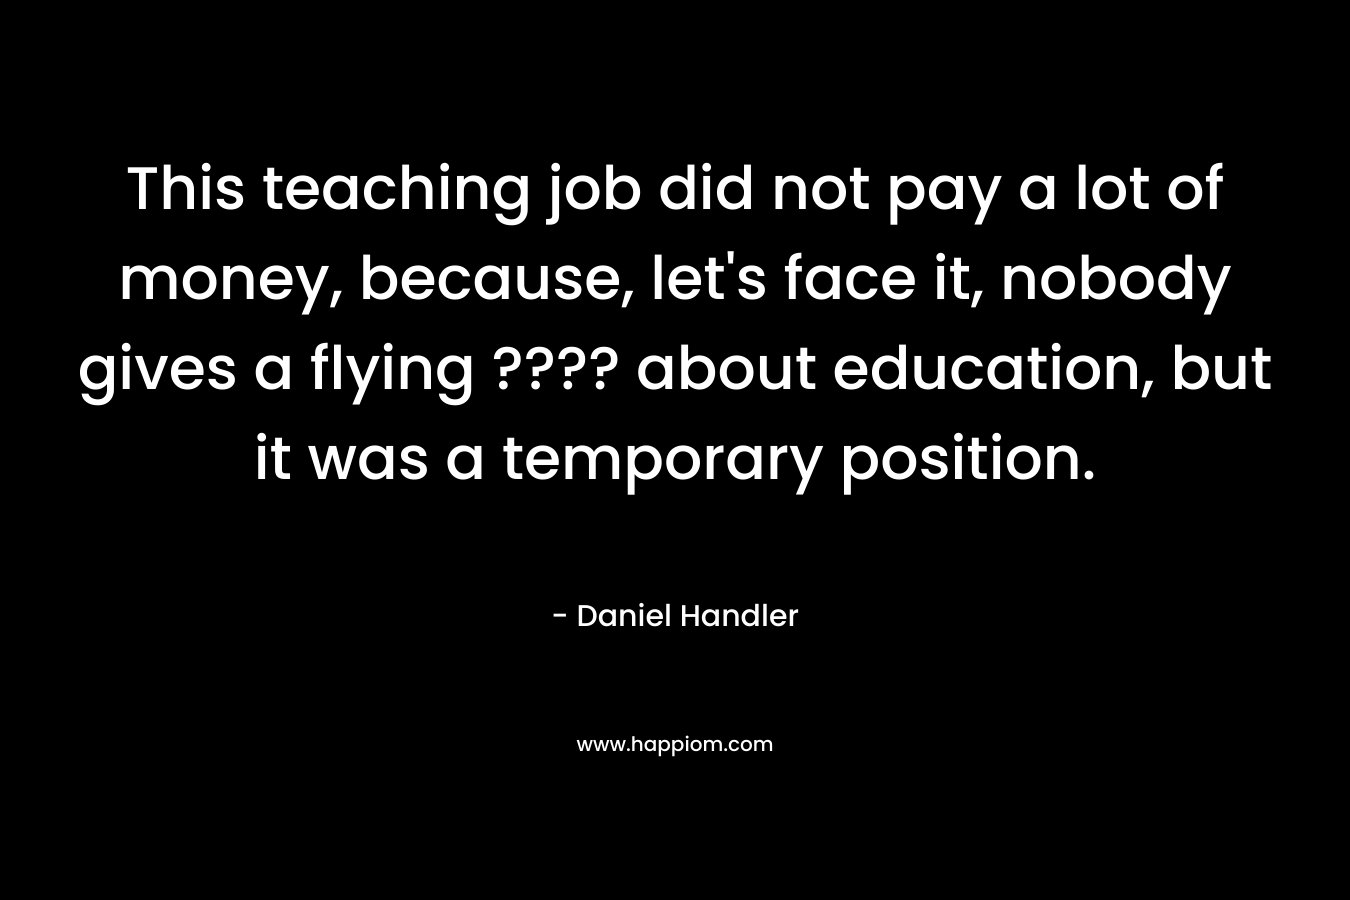 This teaching job did not pay a lot of money, because, let's face it, nobody gives a flying ???? about education, but it was a temporary position.